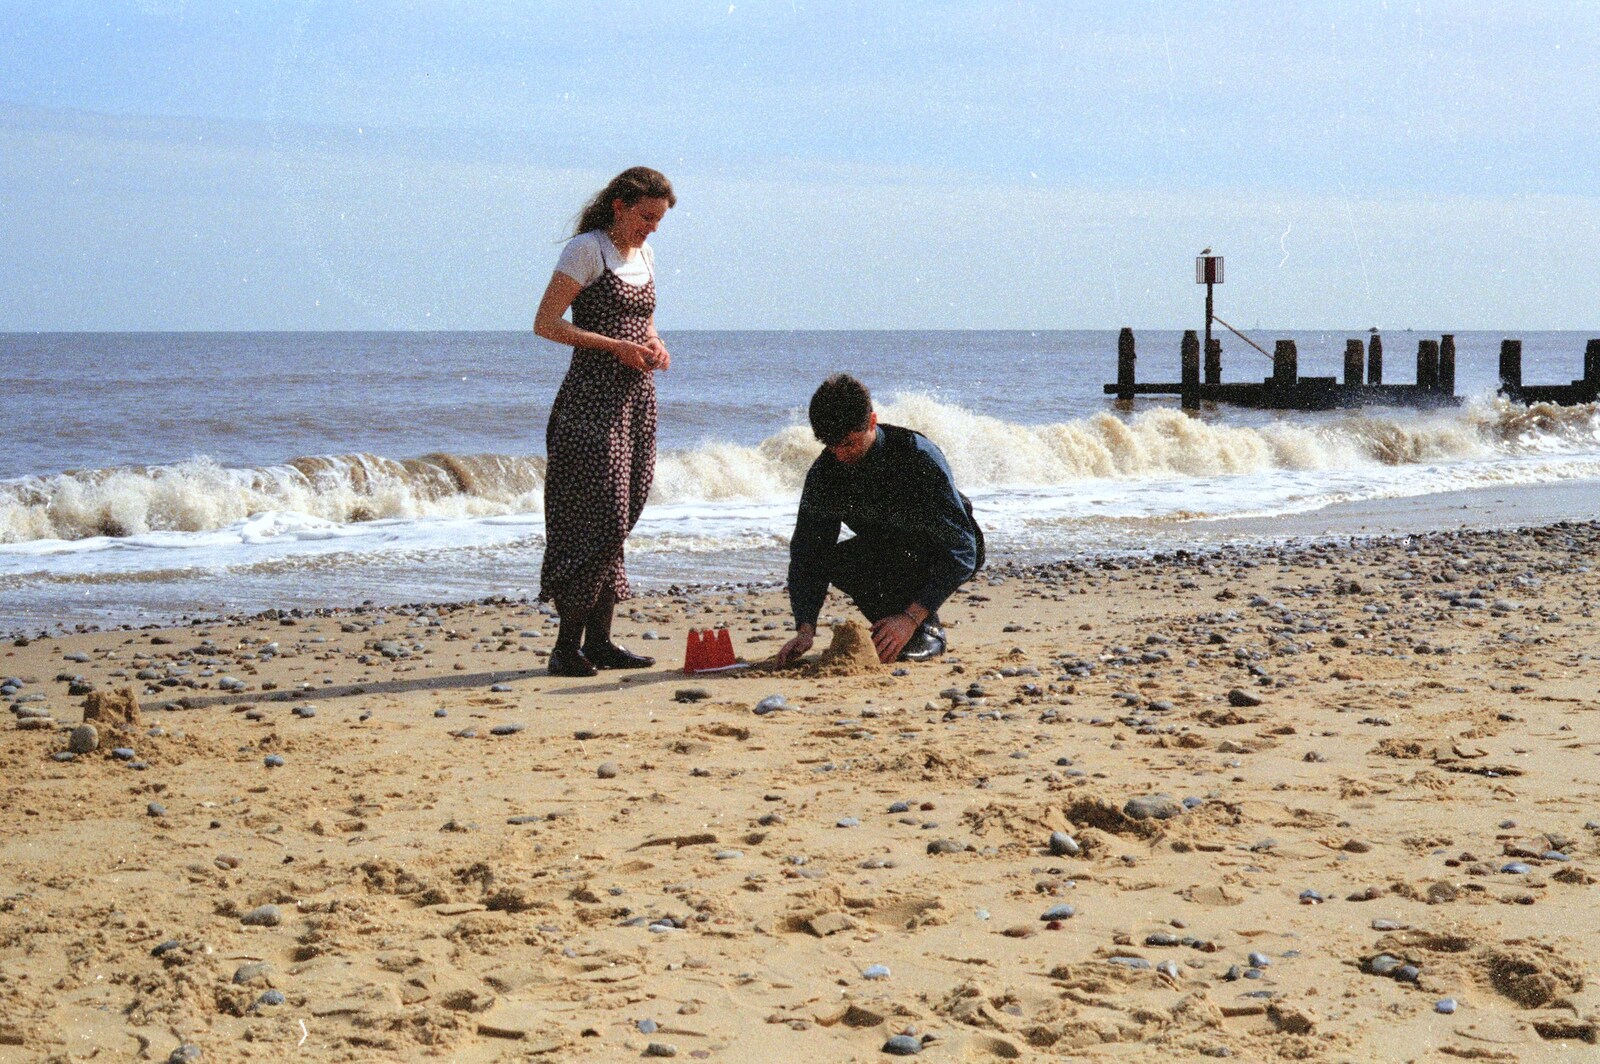 A Phil and Sean Weekend, and Bedroom Building, Brome, Norwich and Southwold - 18th April 1995: Cassie and Sean